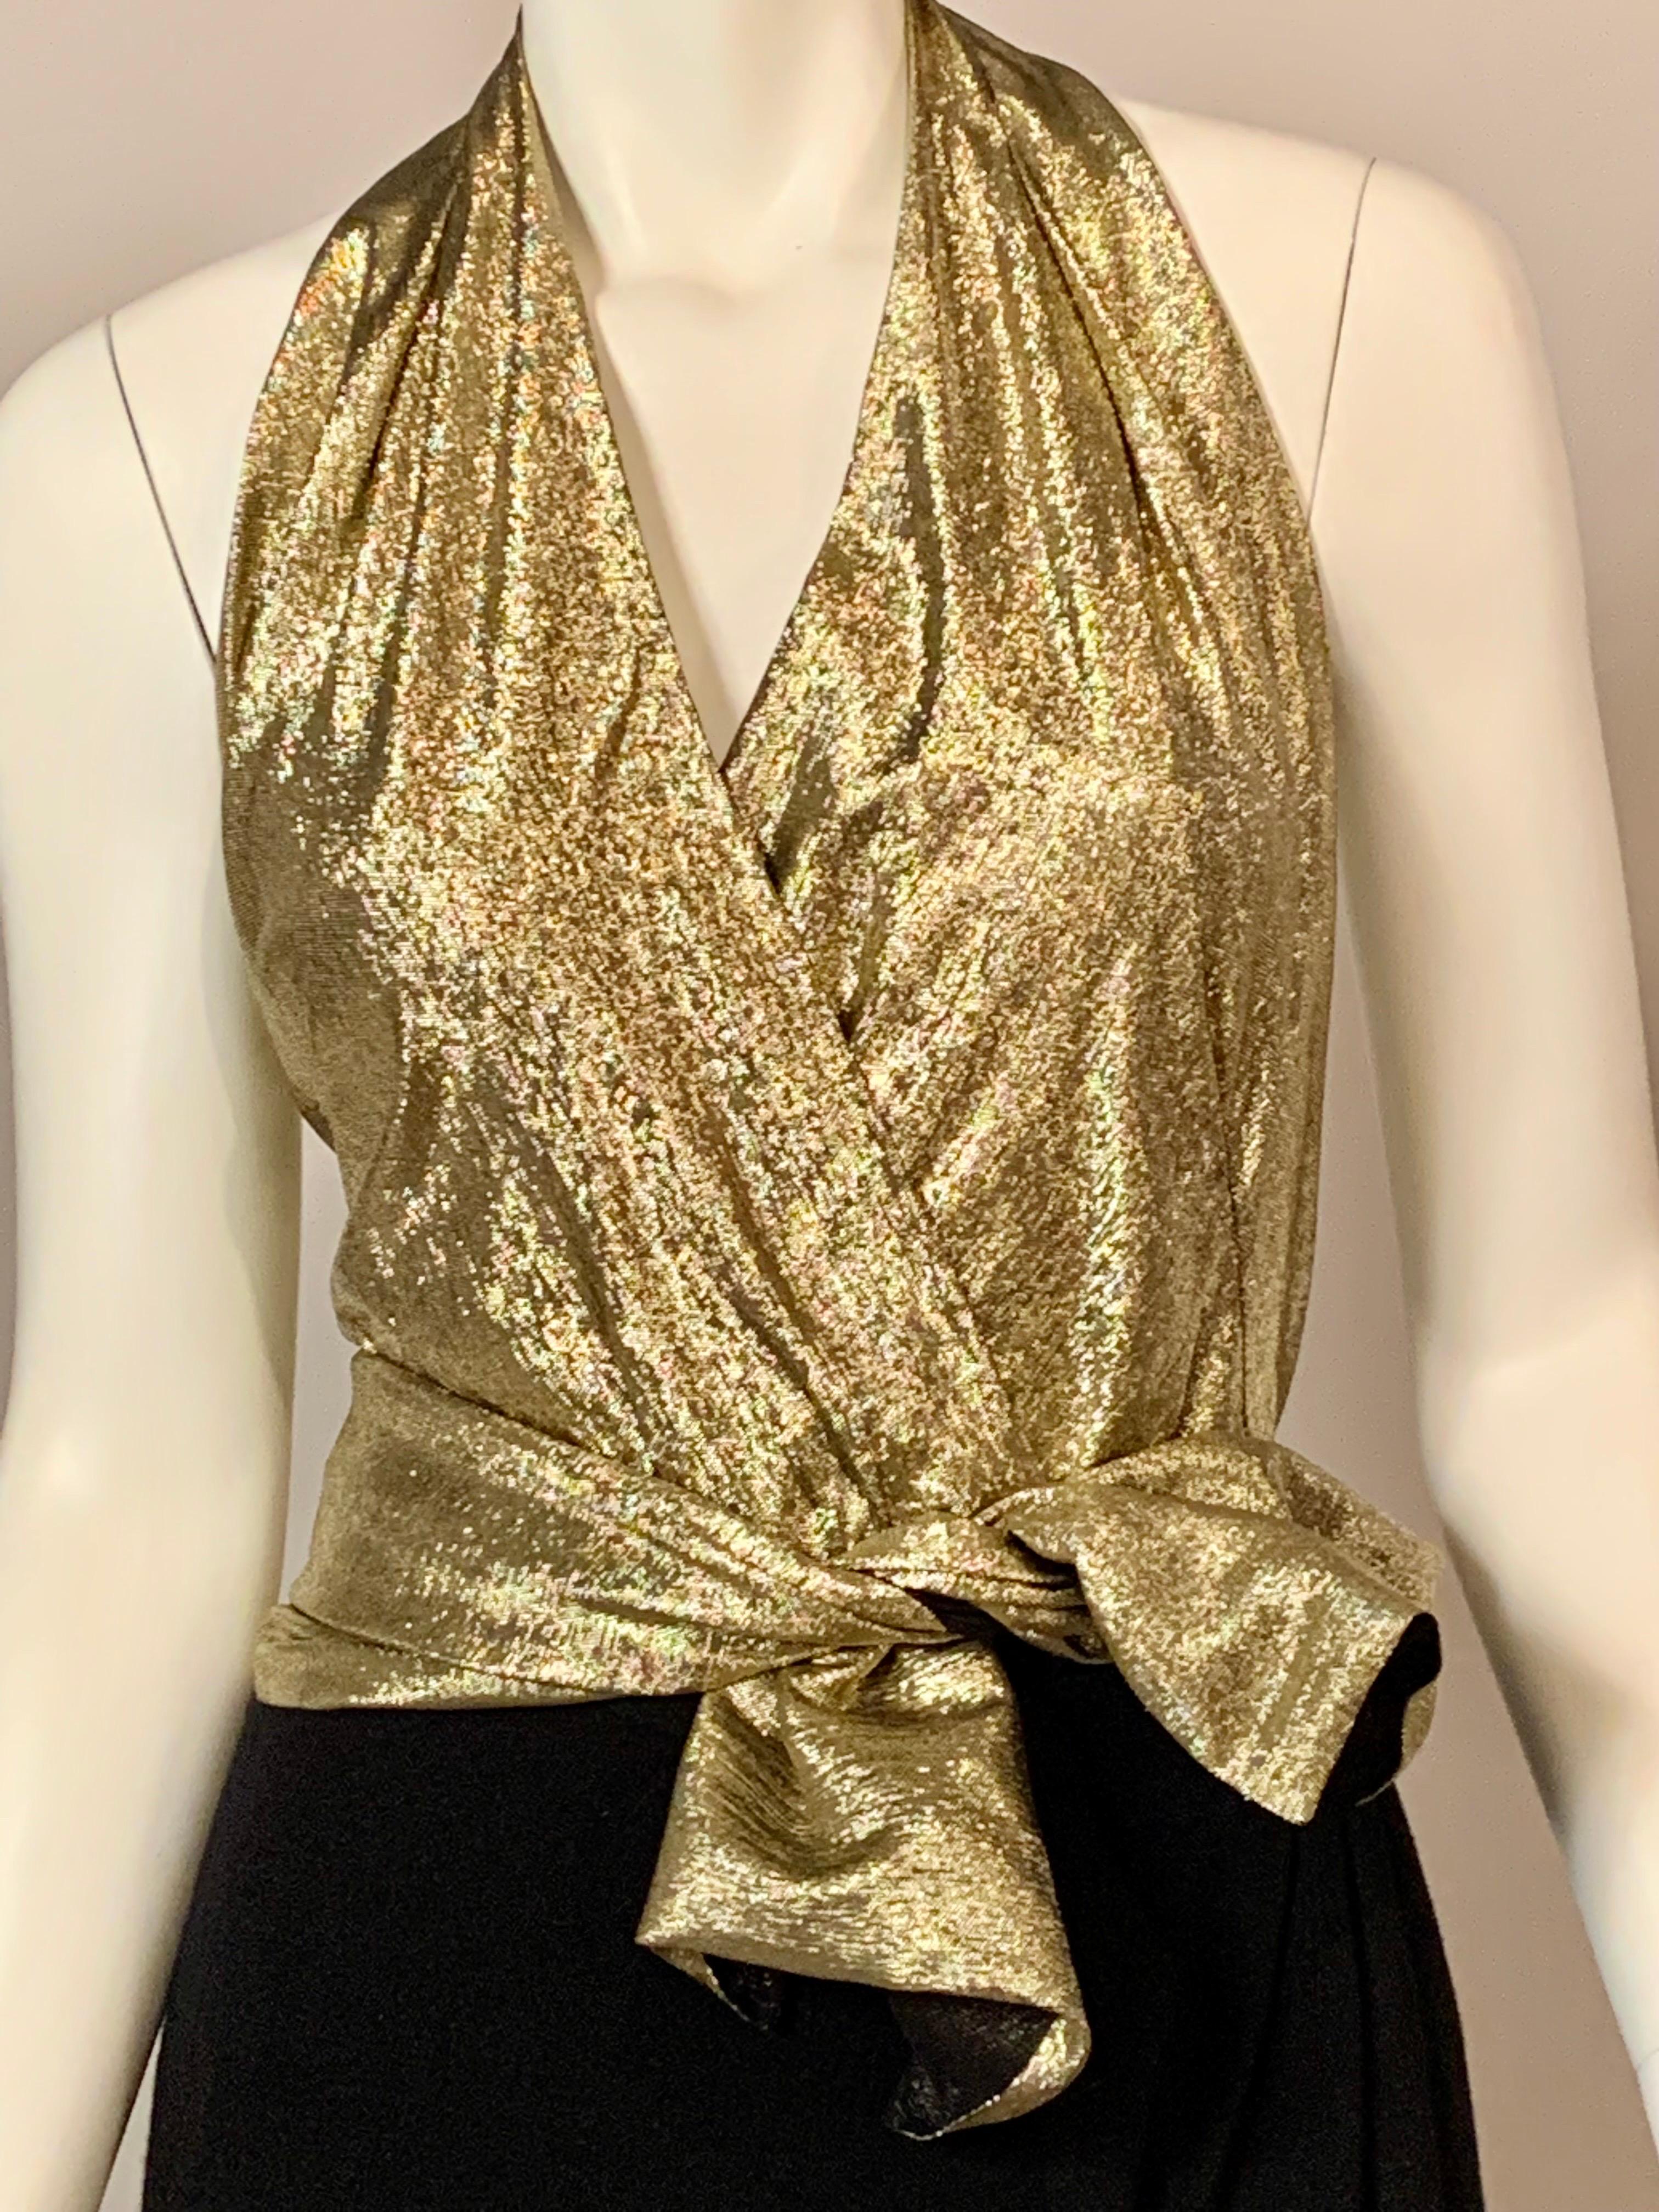 This is a stunning set from Pauline Trigere consisting of a gold halter neck bare back body suit, a matching gold sash, a black wool faux wrap skirt with a high opening in the front., and a matching black wool cape with a tie at the neckline. The